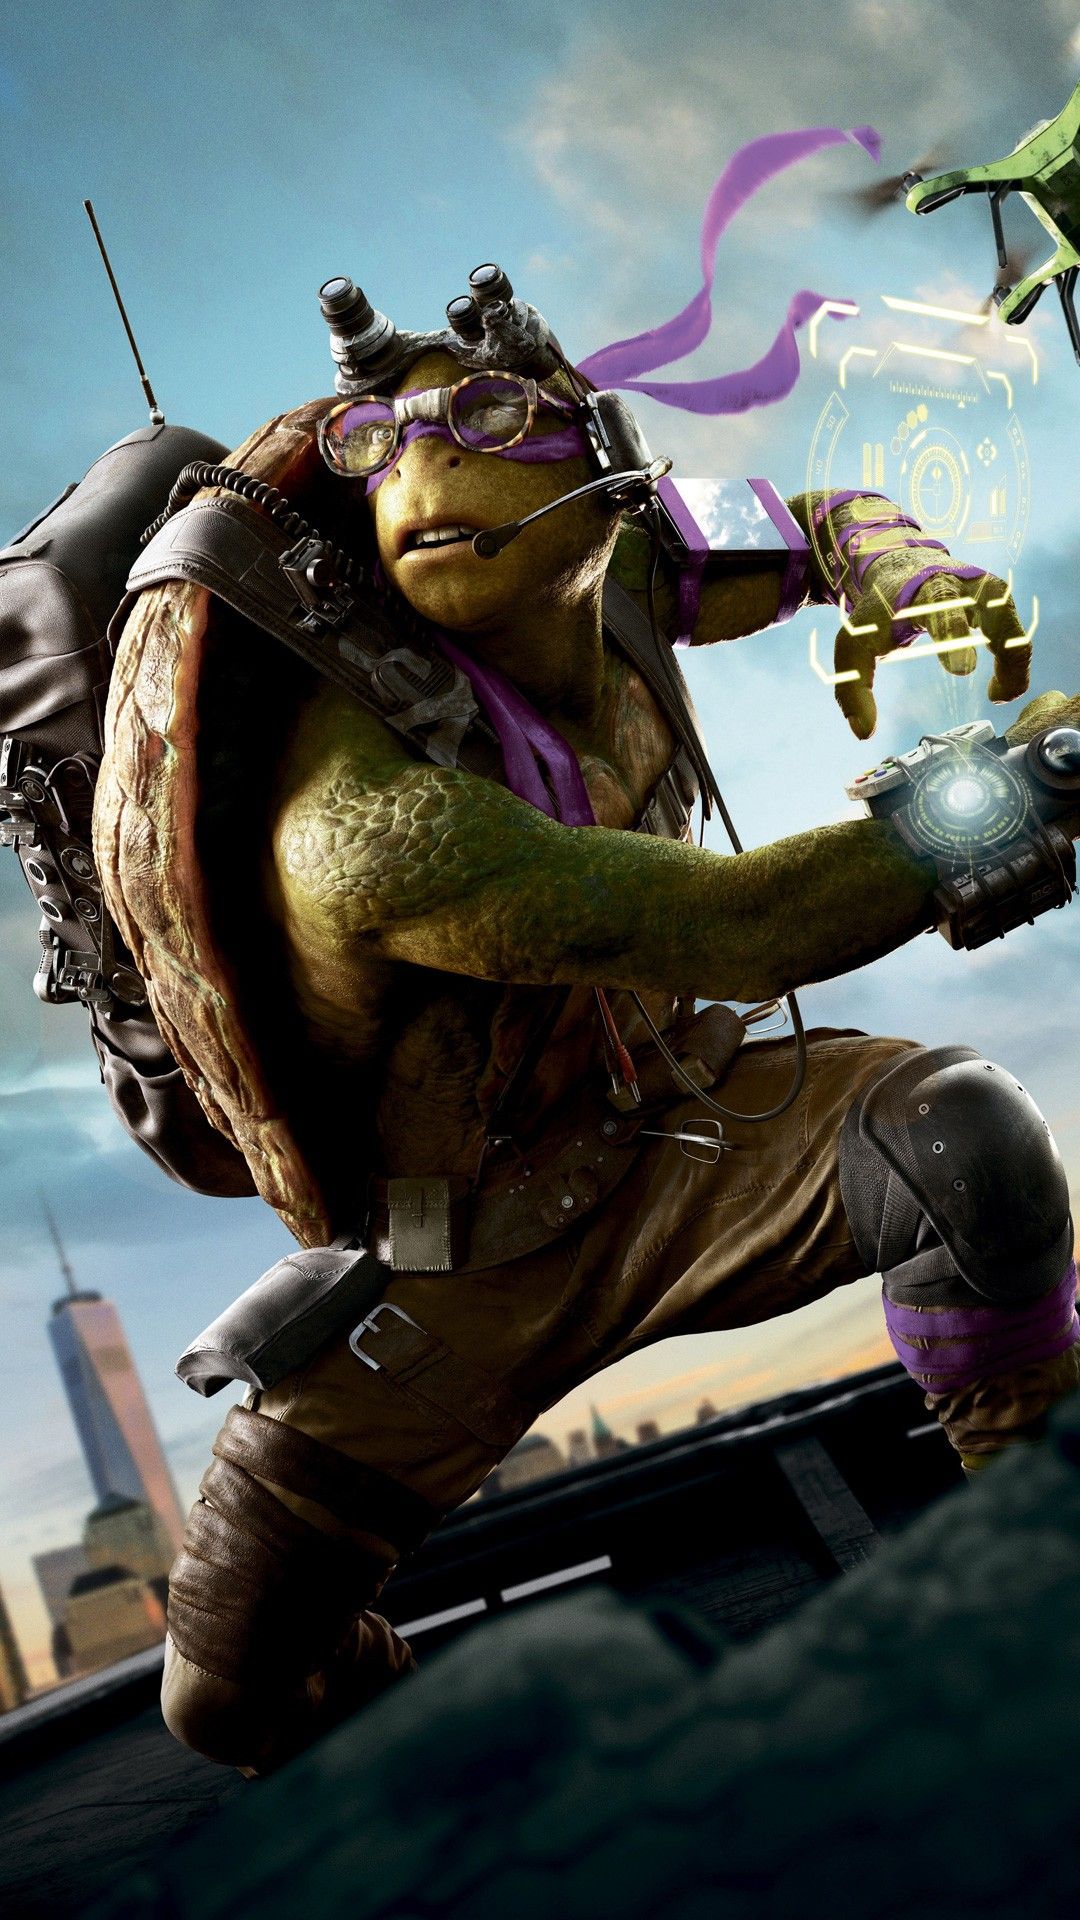 Donatello TMNT Out of the Shadows Wallpaper